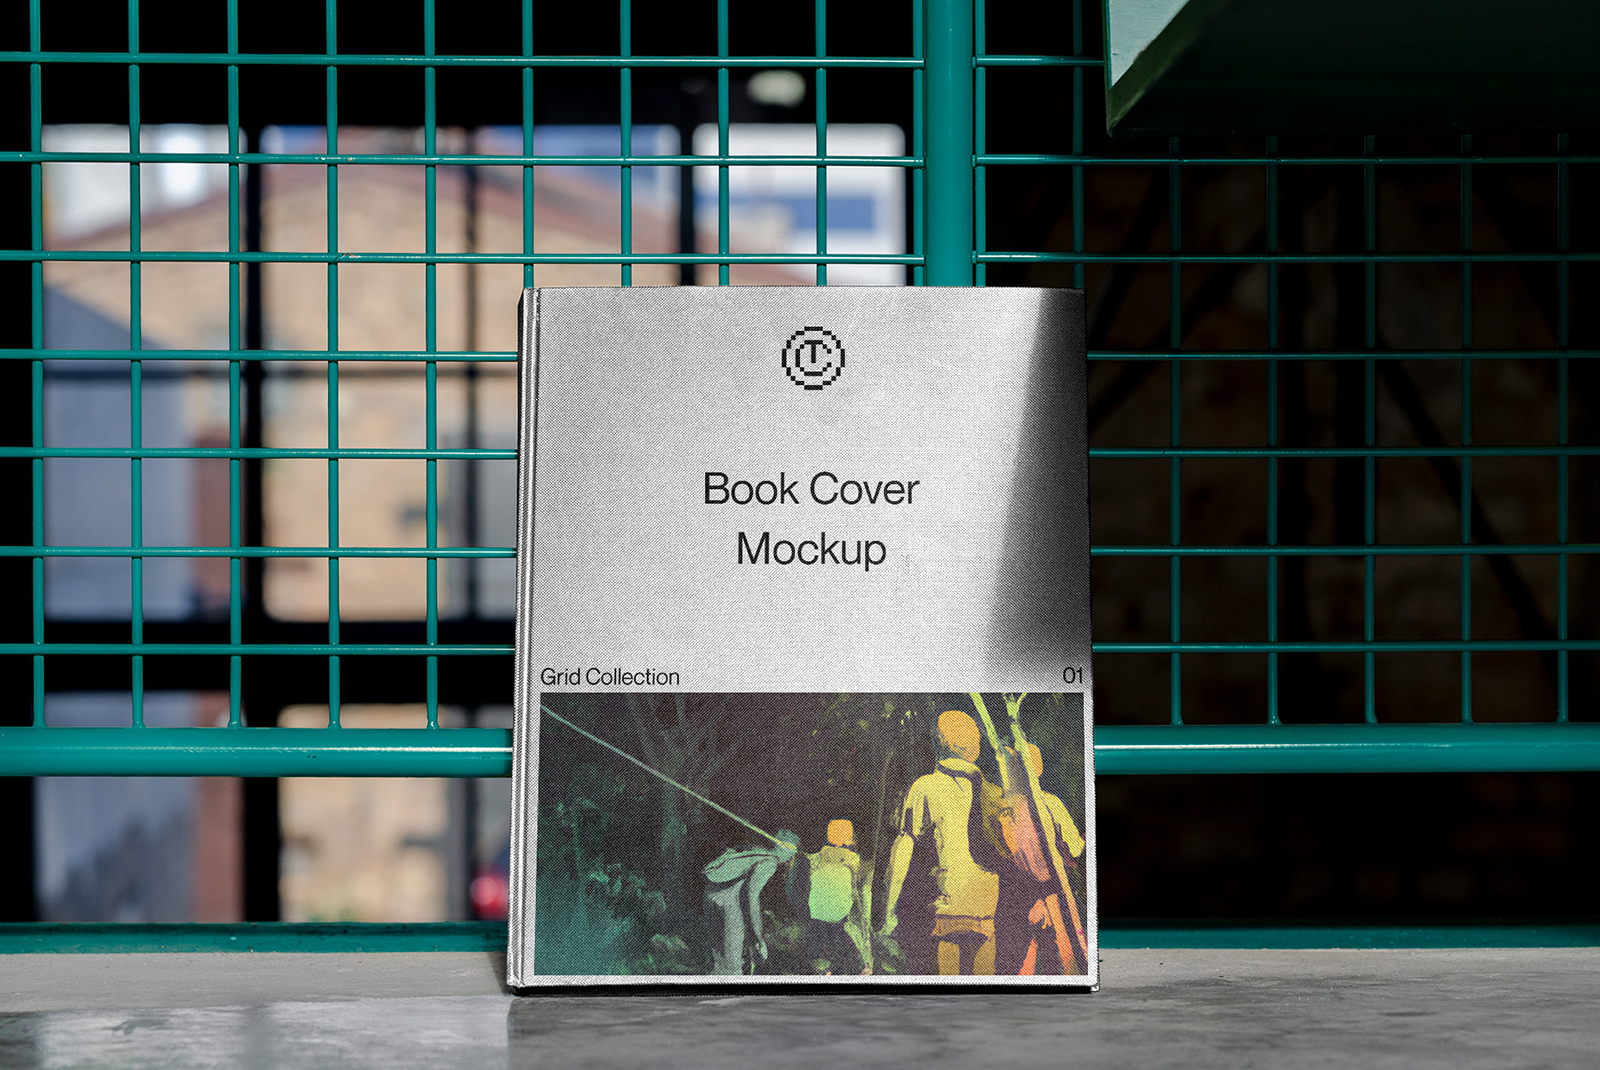 Realistic book cover mockup displayed on urban metal grid, showcasing editable template design for branding, standing book, outdoor scene.